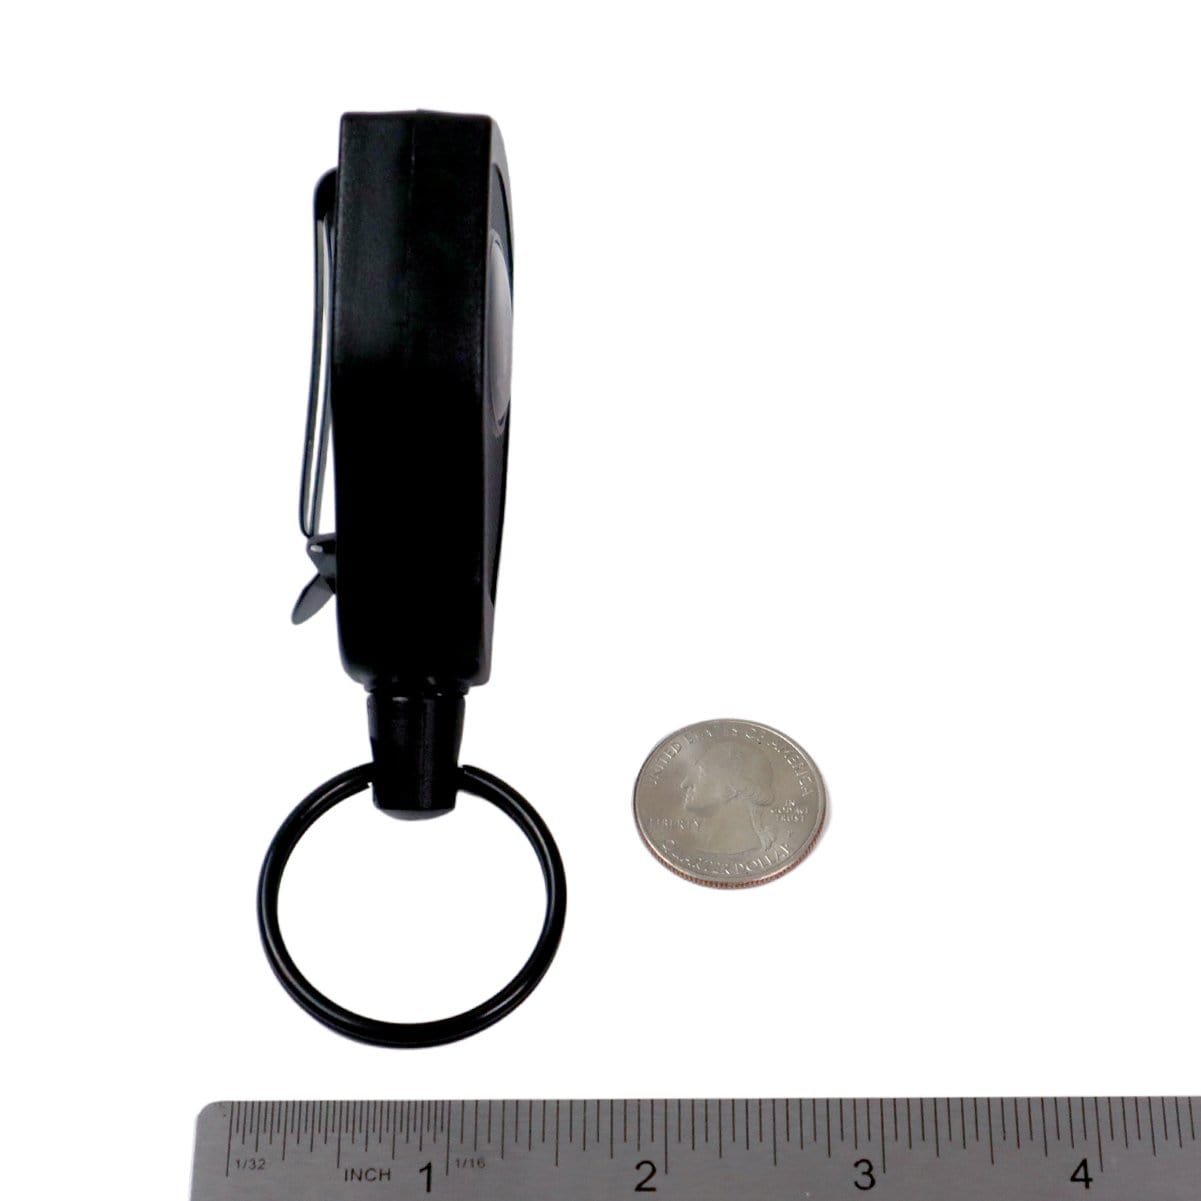 A Super Heavy Duty Retractable Keychain - 8oz or 10 Keys - Durable 48” (4 Ft) Kevlar Lanyard with a black, round attachment is shown next to a quarter and a ruler for size comparison.